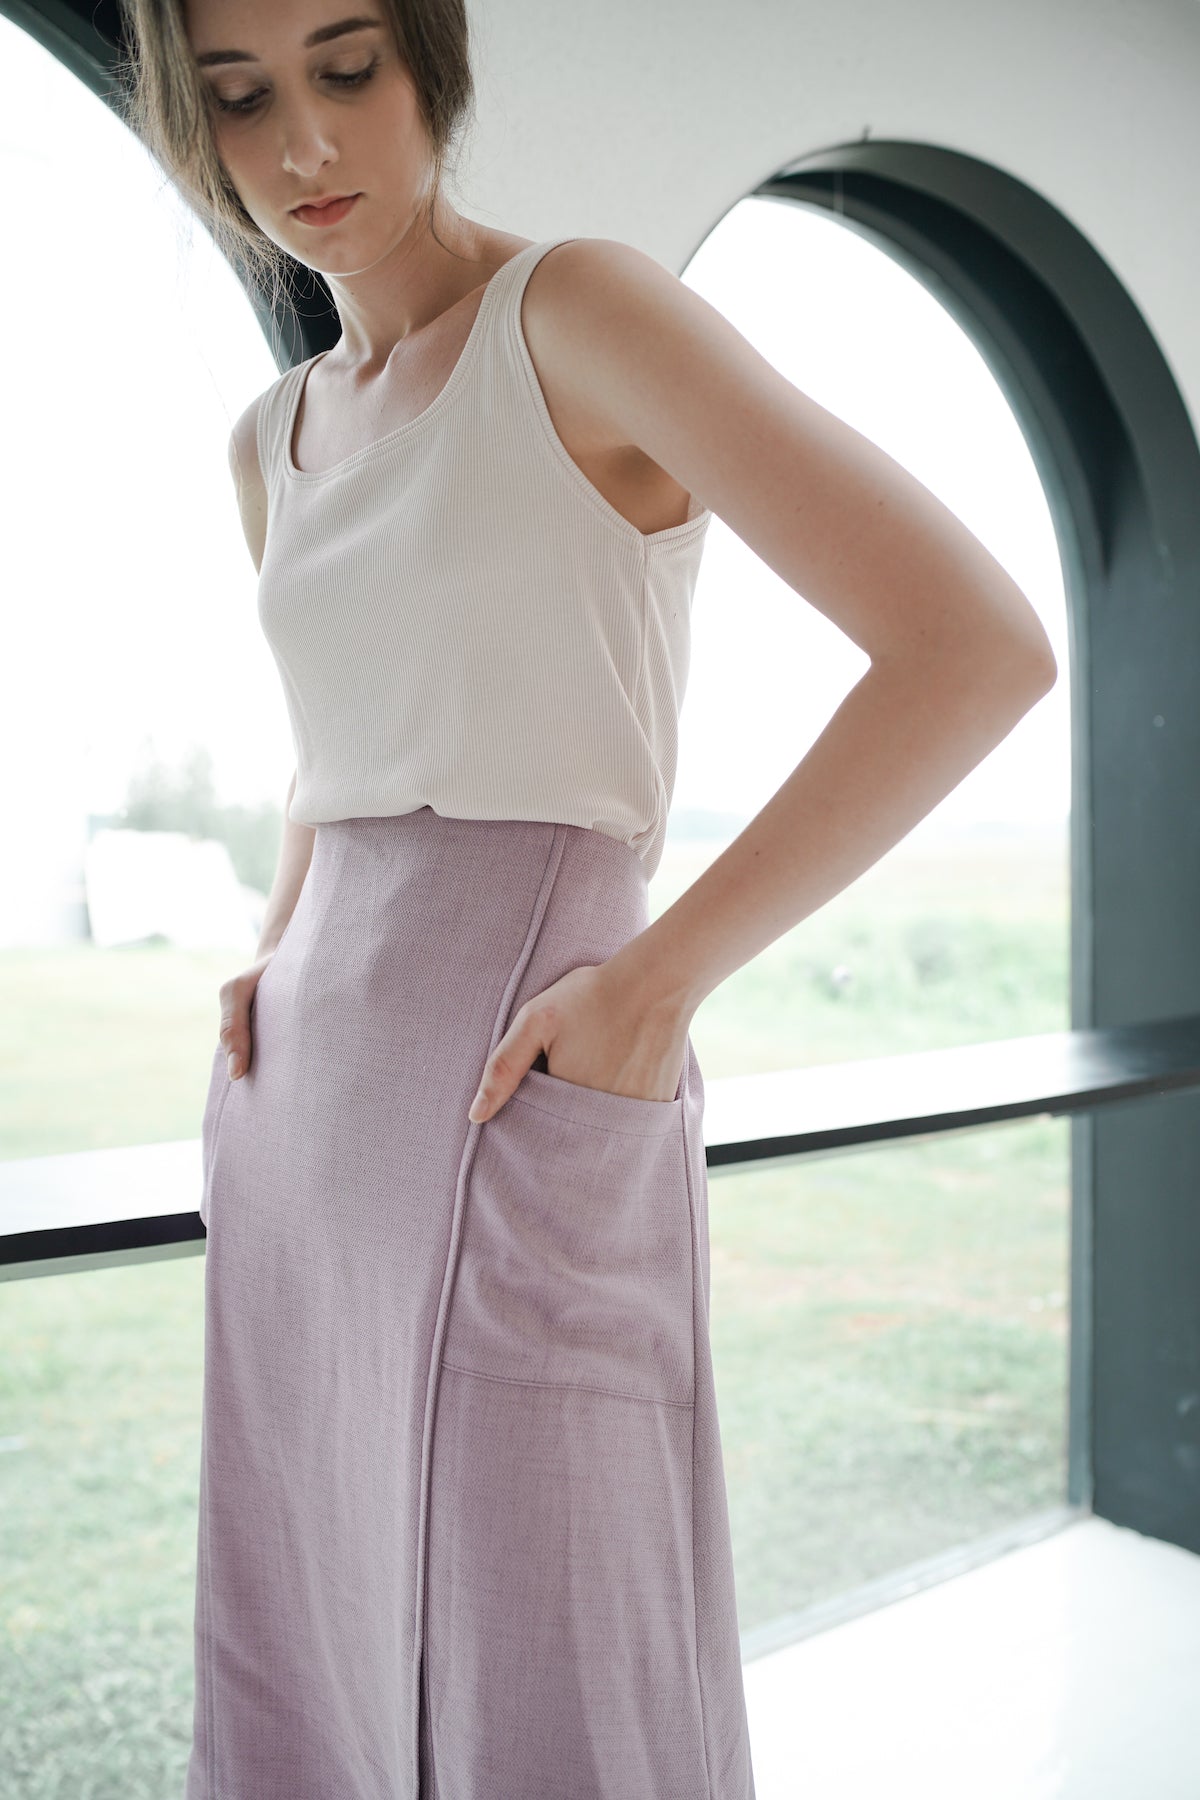 LEII SKIRT IN ORCHID LILAC